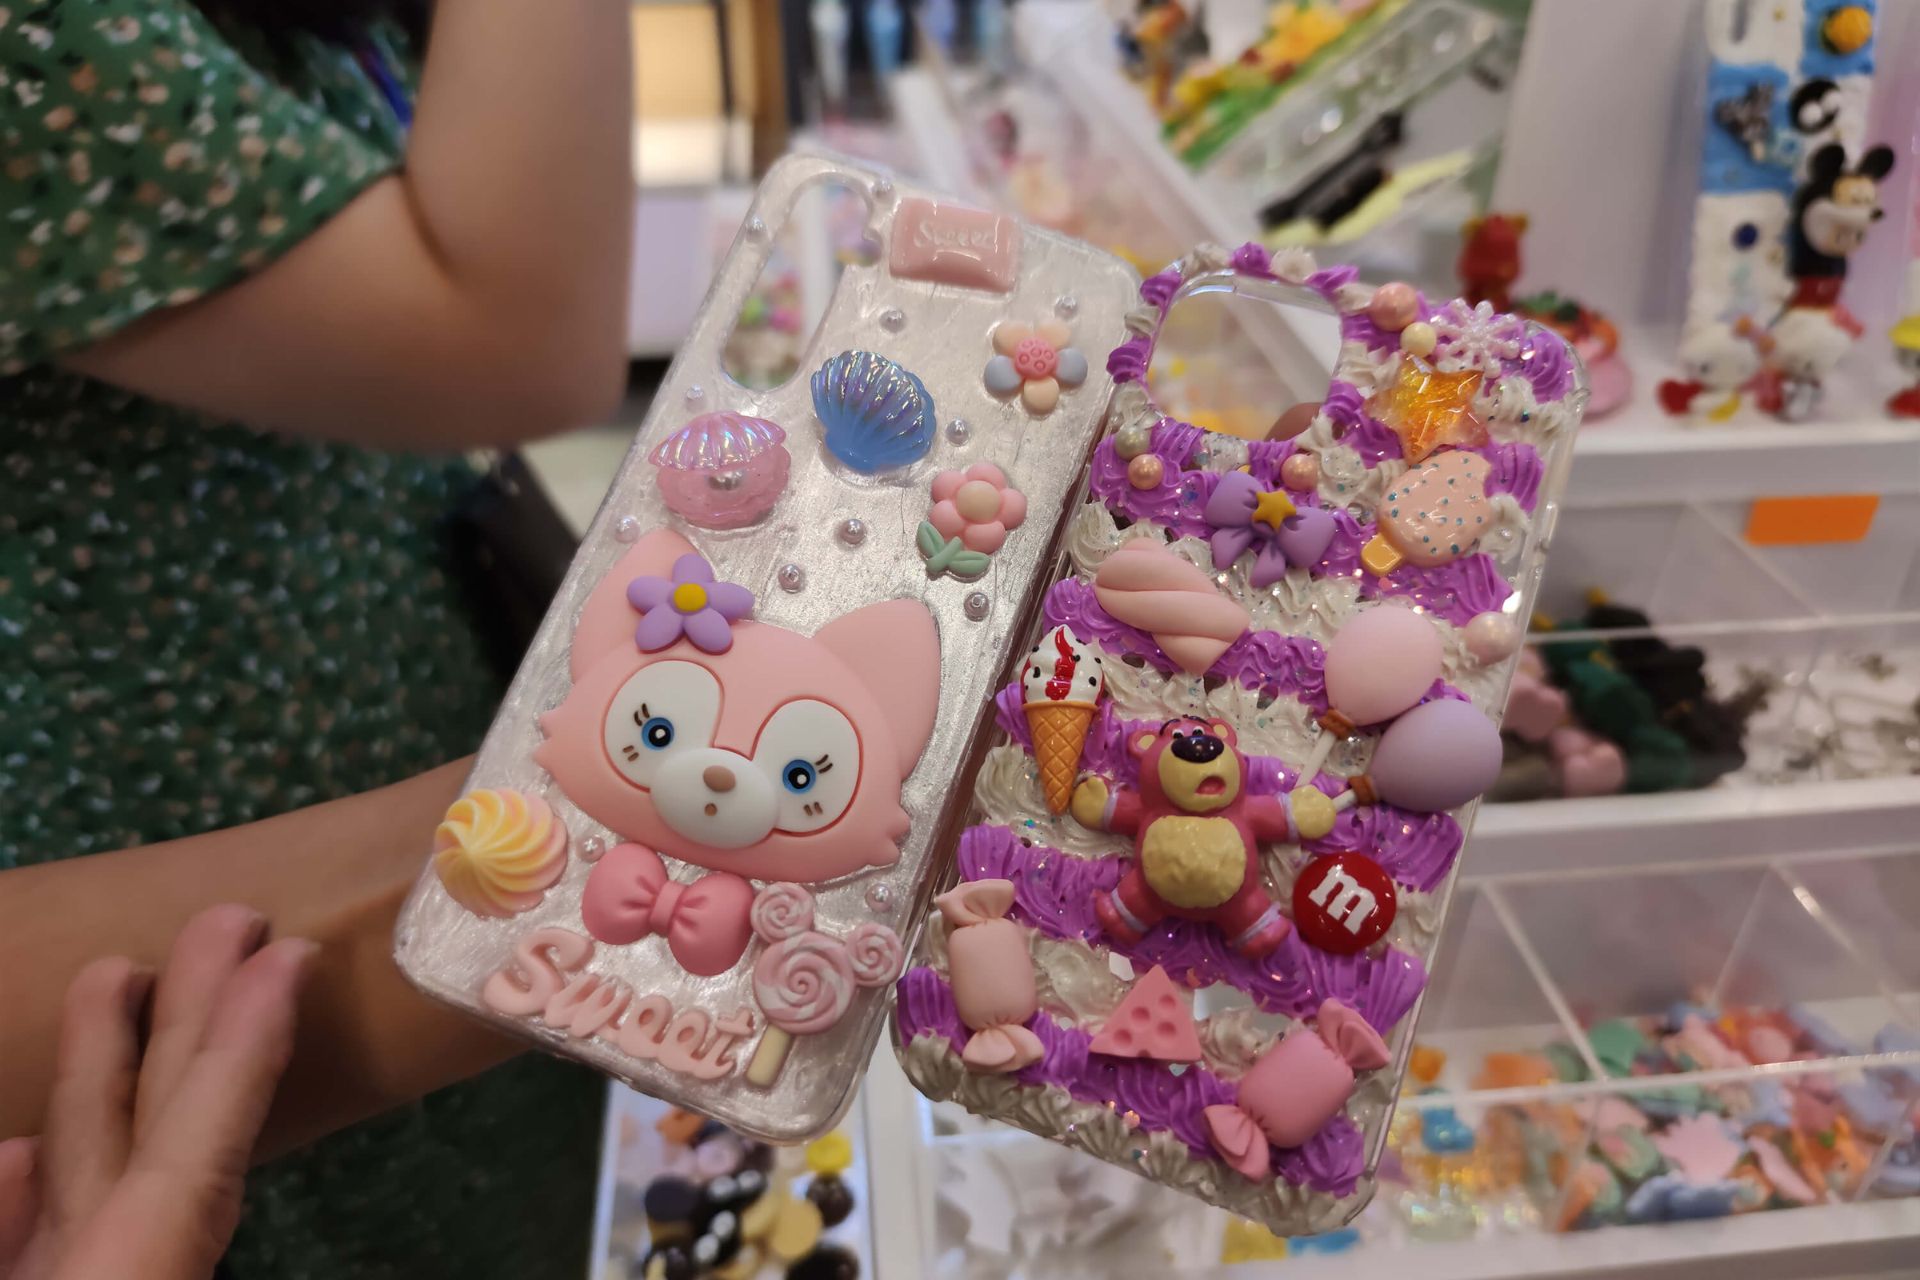 Limitations On Attaching Charms To Phone Cases: Insights